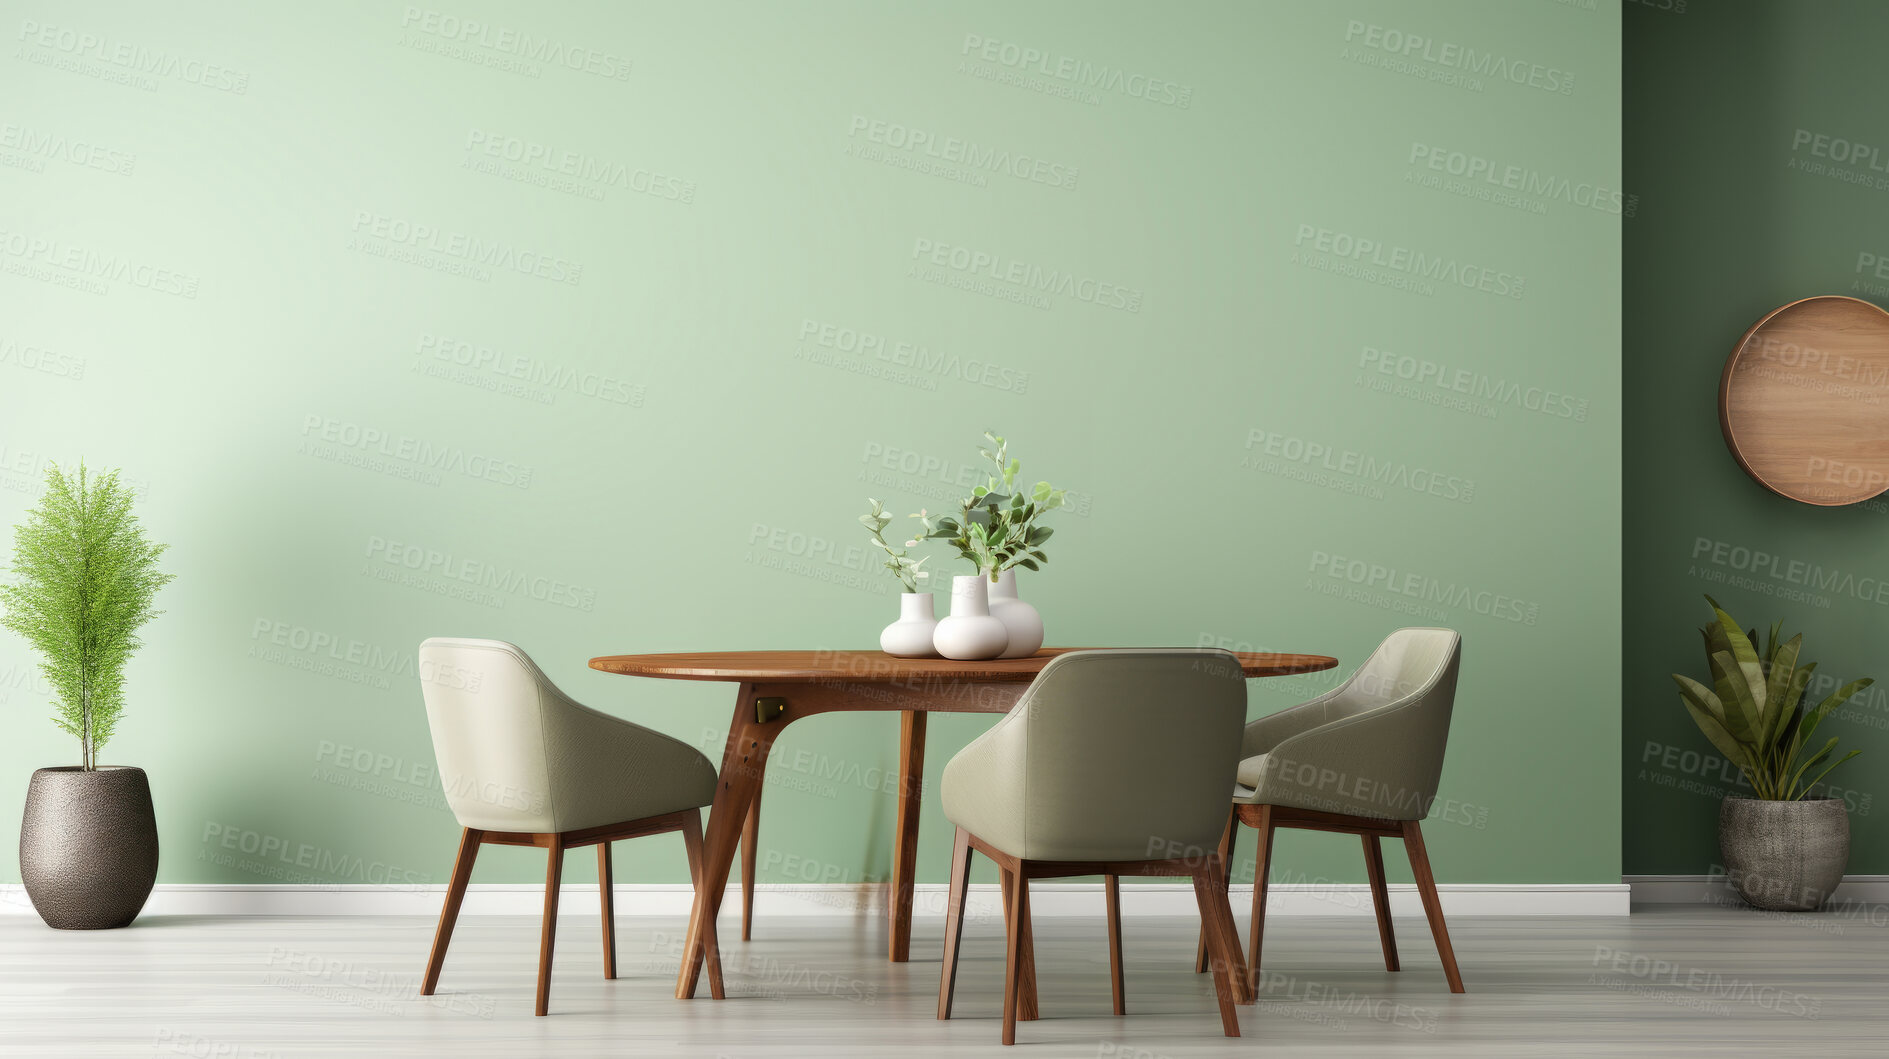 Buy stock photo Furniture, dining room and modern table and chairs made of wood for apartment, hotel and home. Creative, innovation and lifestyle mockup with texture for restaurant, dinner and decor inspiration